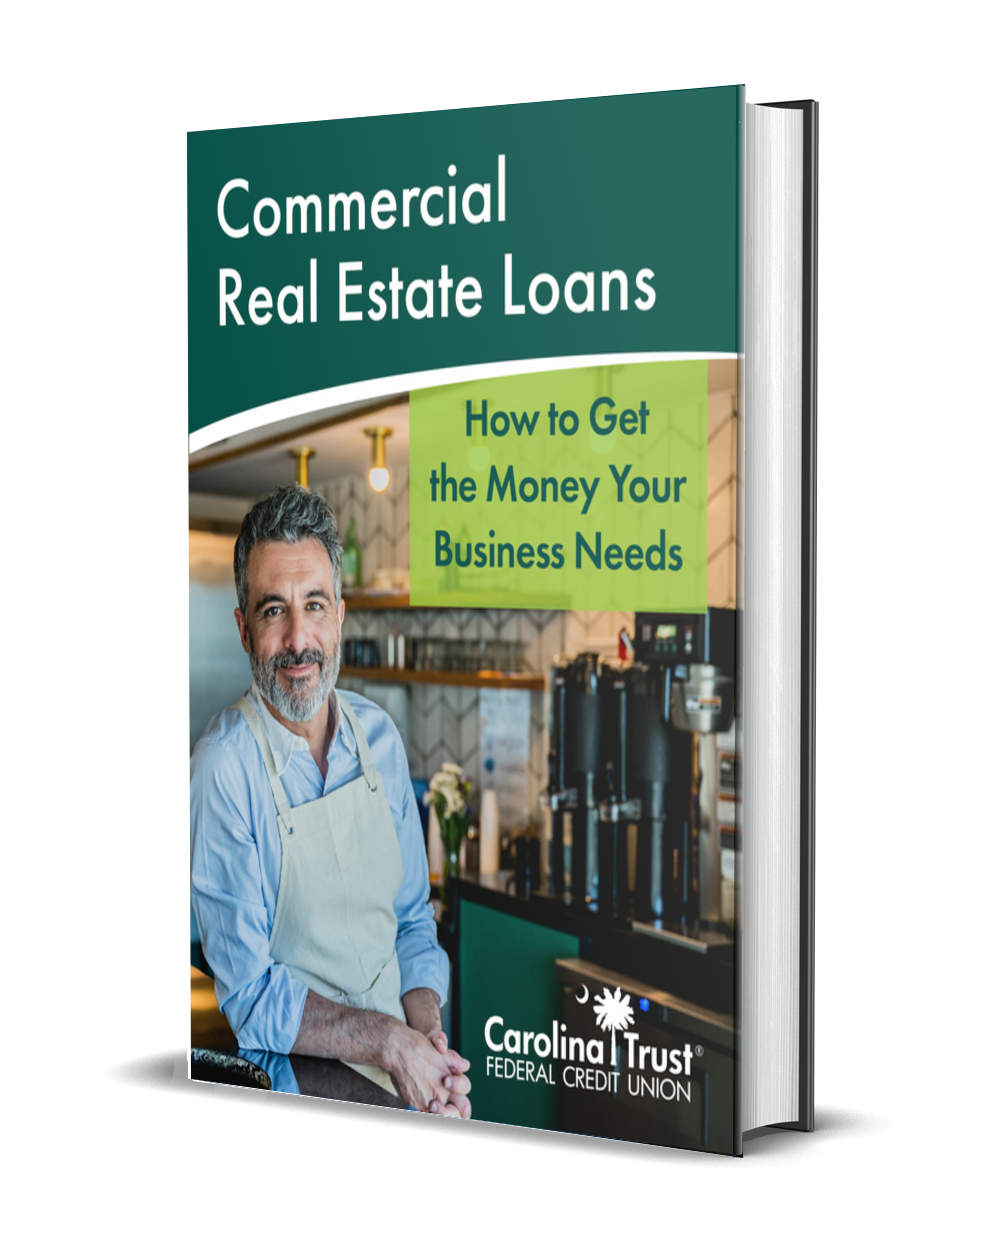 Commercial Real Estate Loans How to Get the Money Your Business Needs eBook Cover